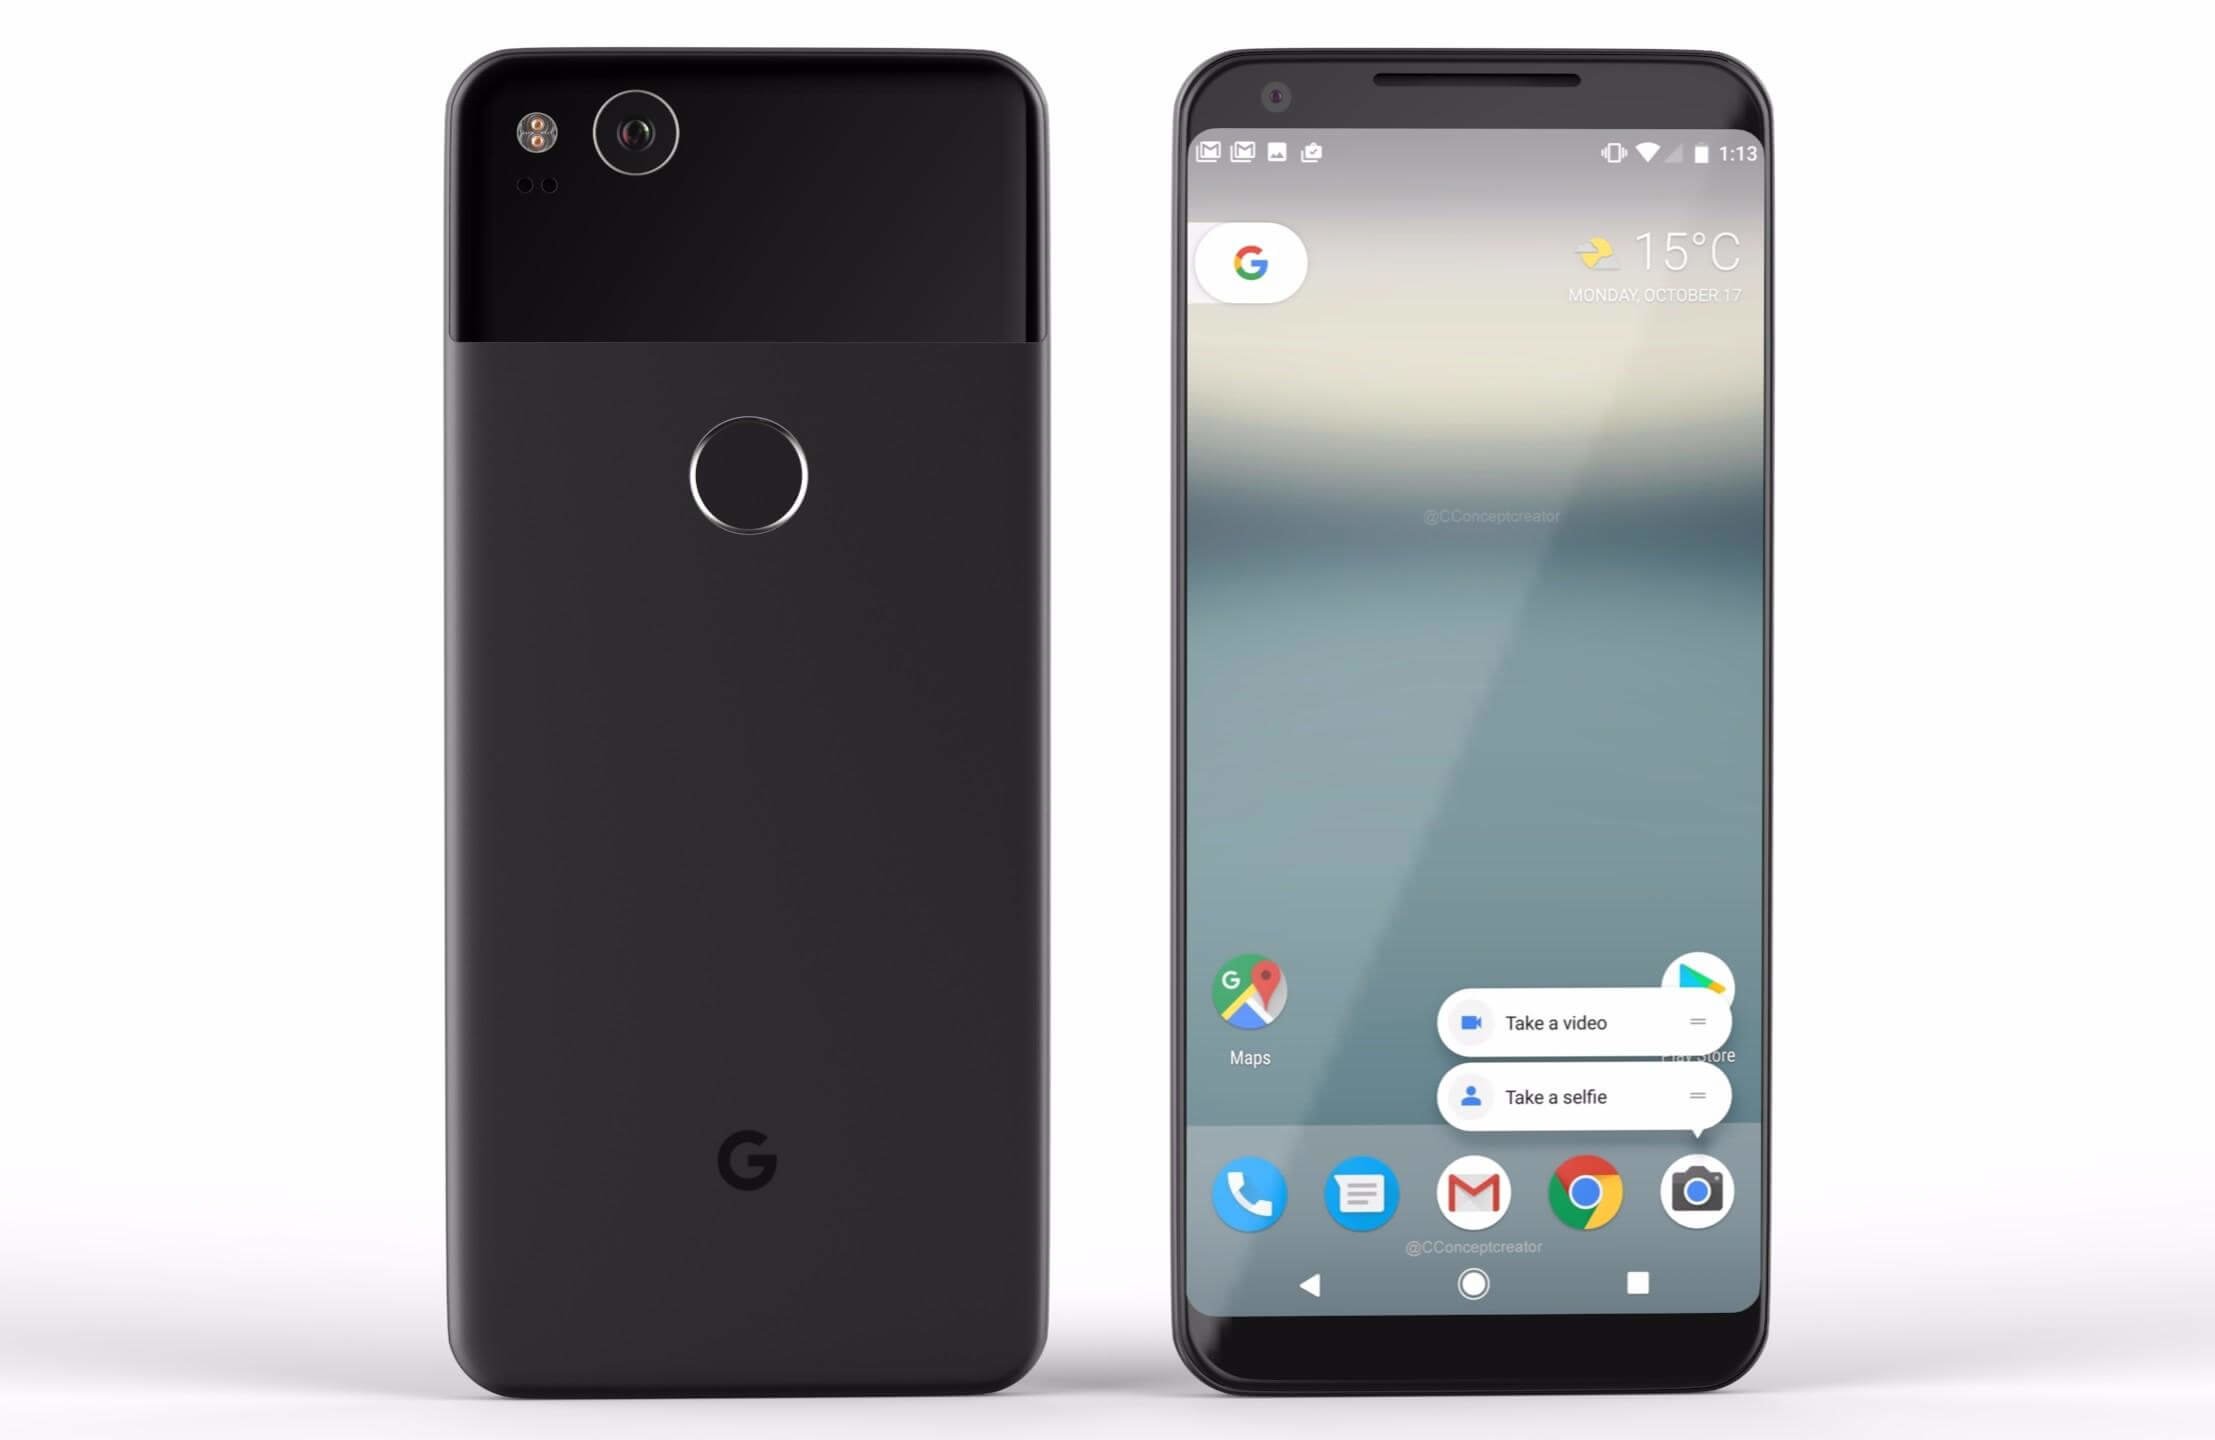 The Google Pixel 2 XL - In-Depth Review